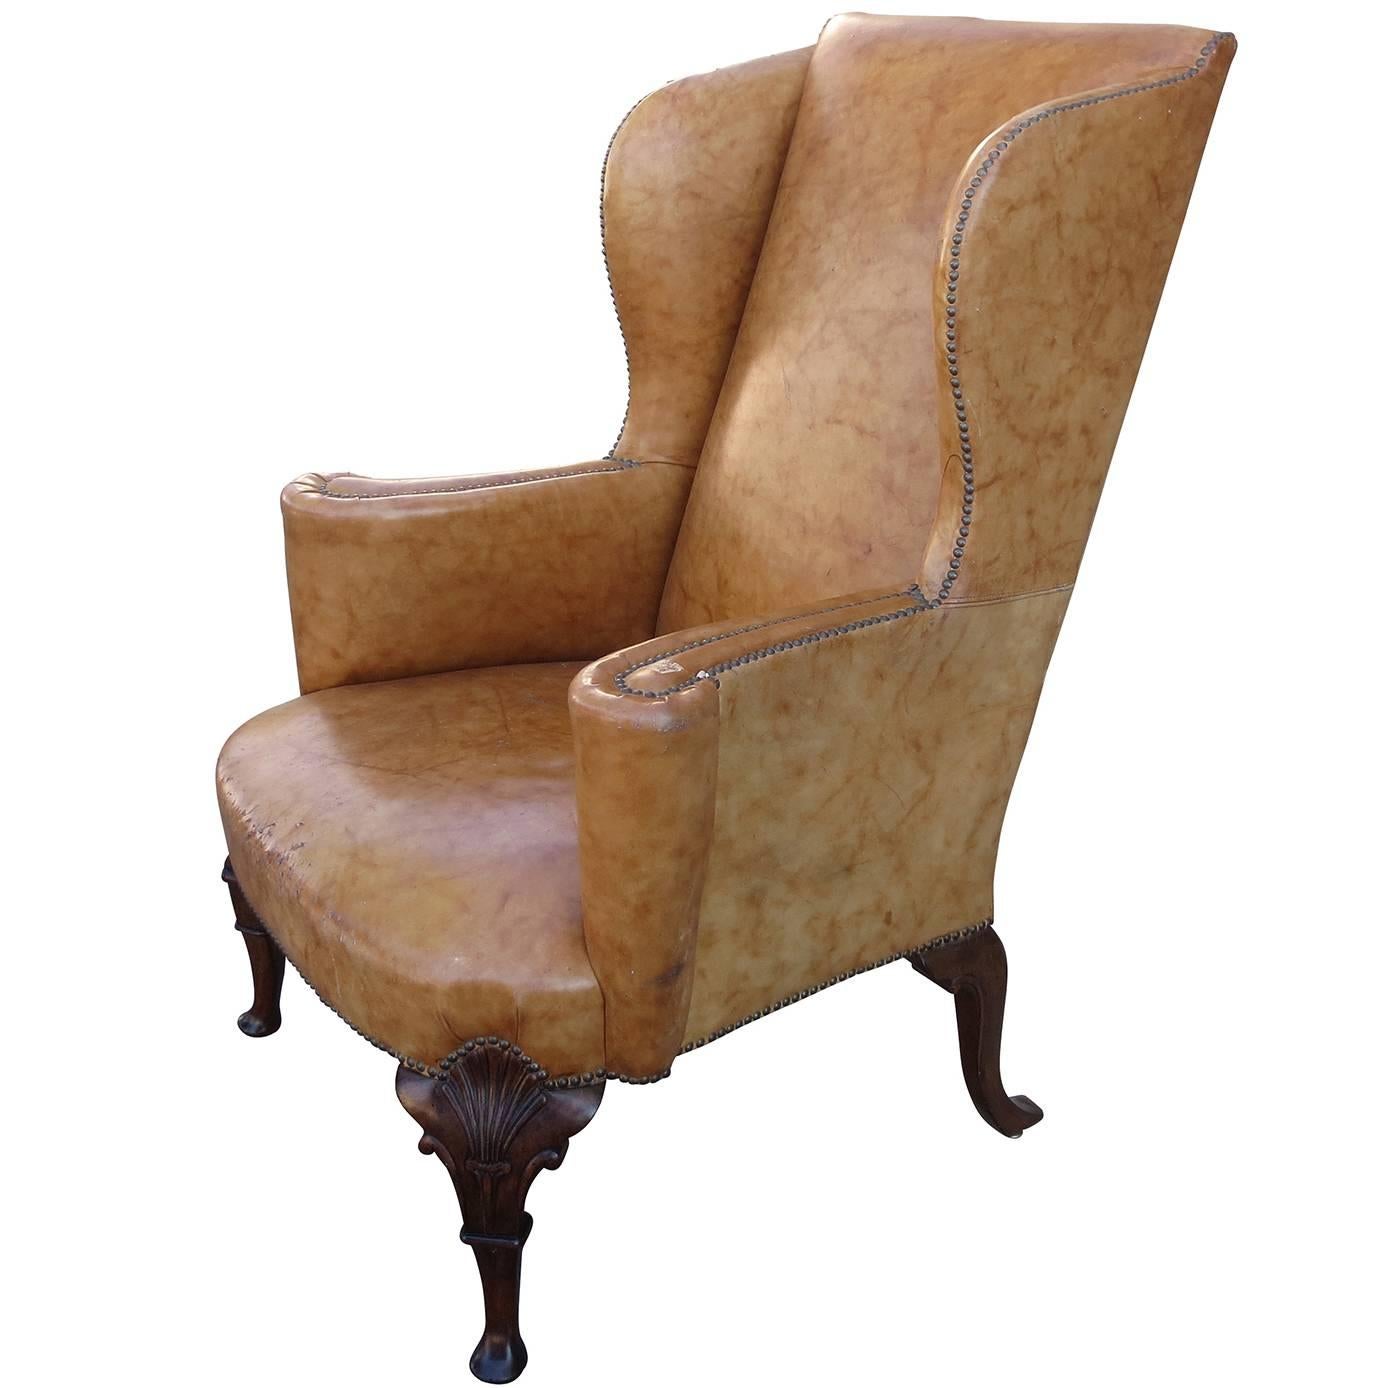 19th Century English Georgian Style Leather Wing Chair, Walnut Cabriole Legs For Sale